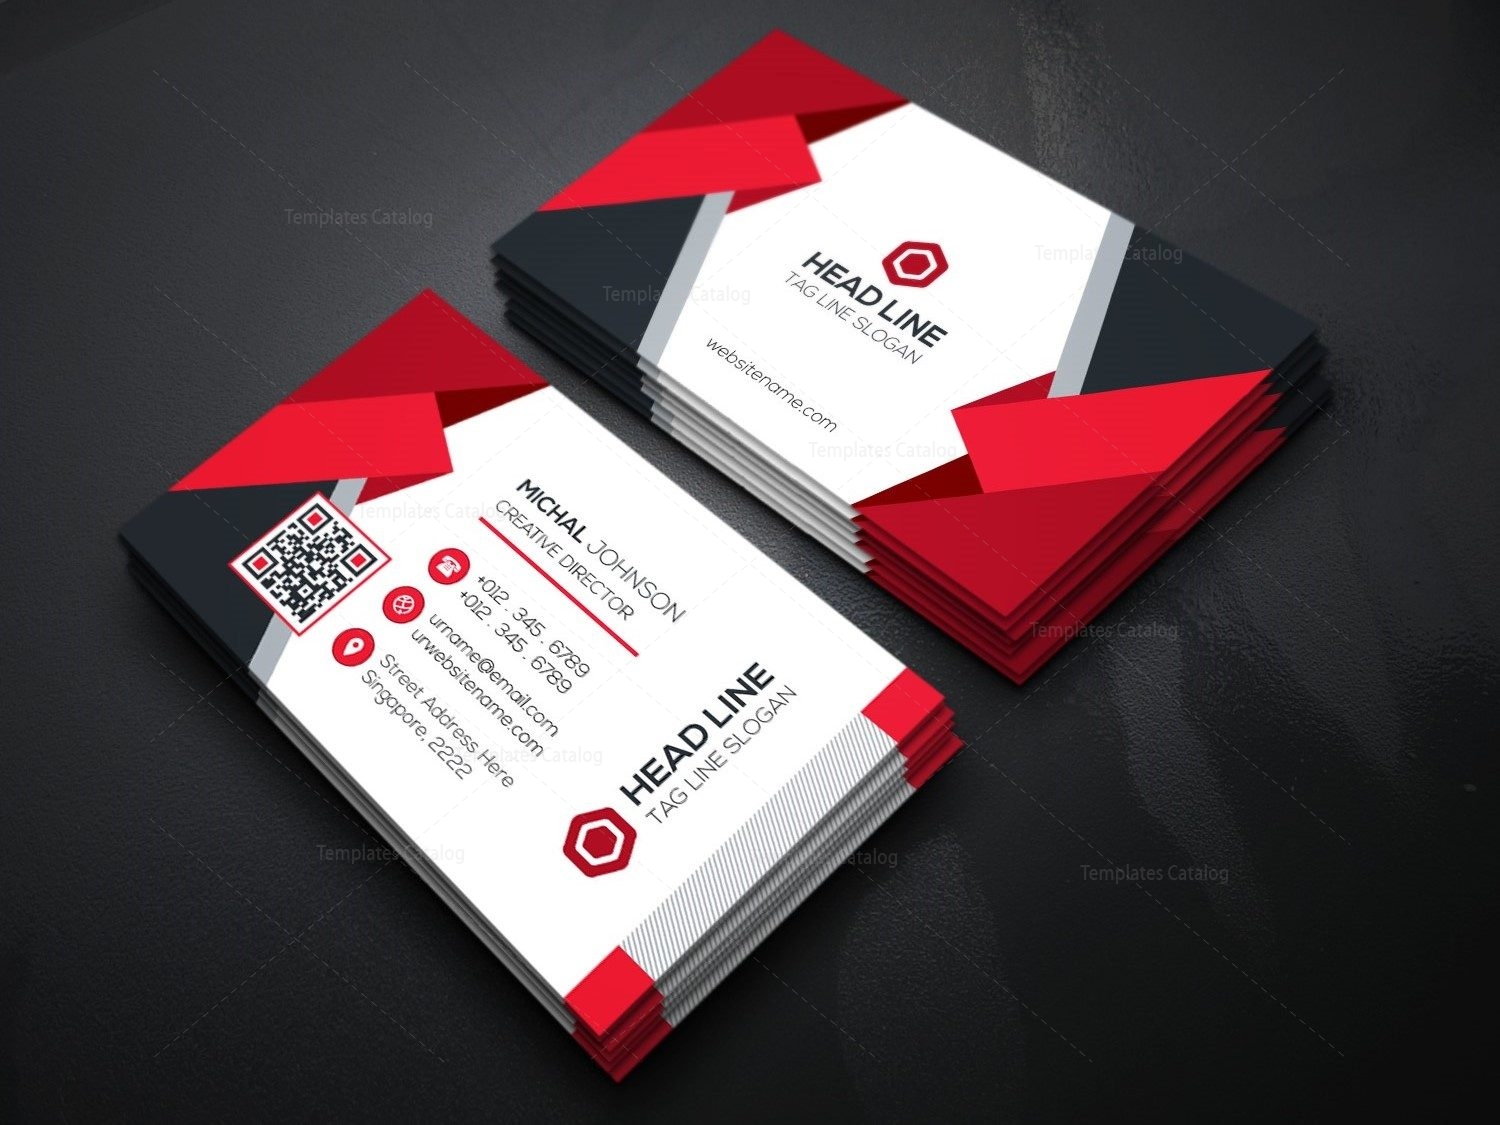 business card template design free download